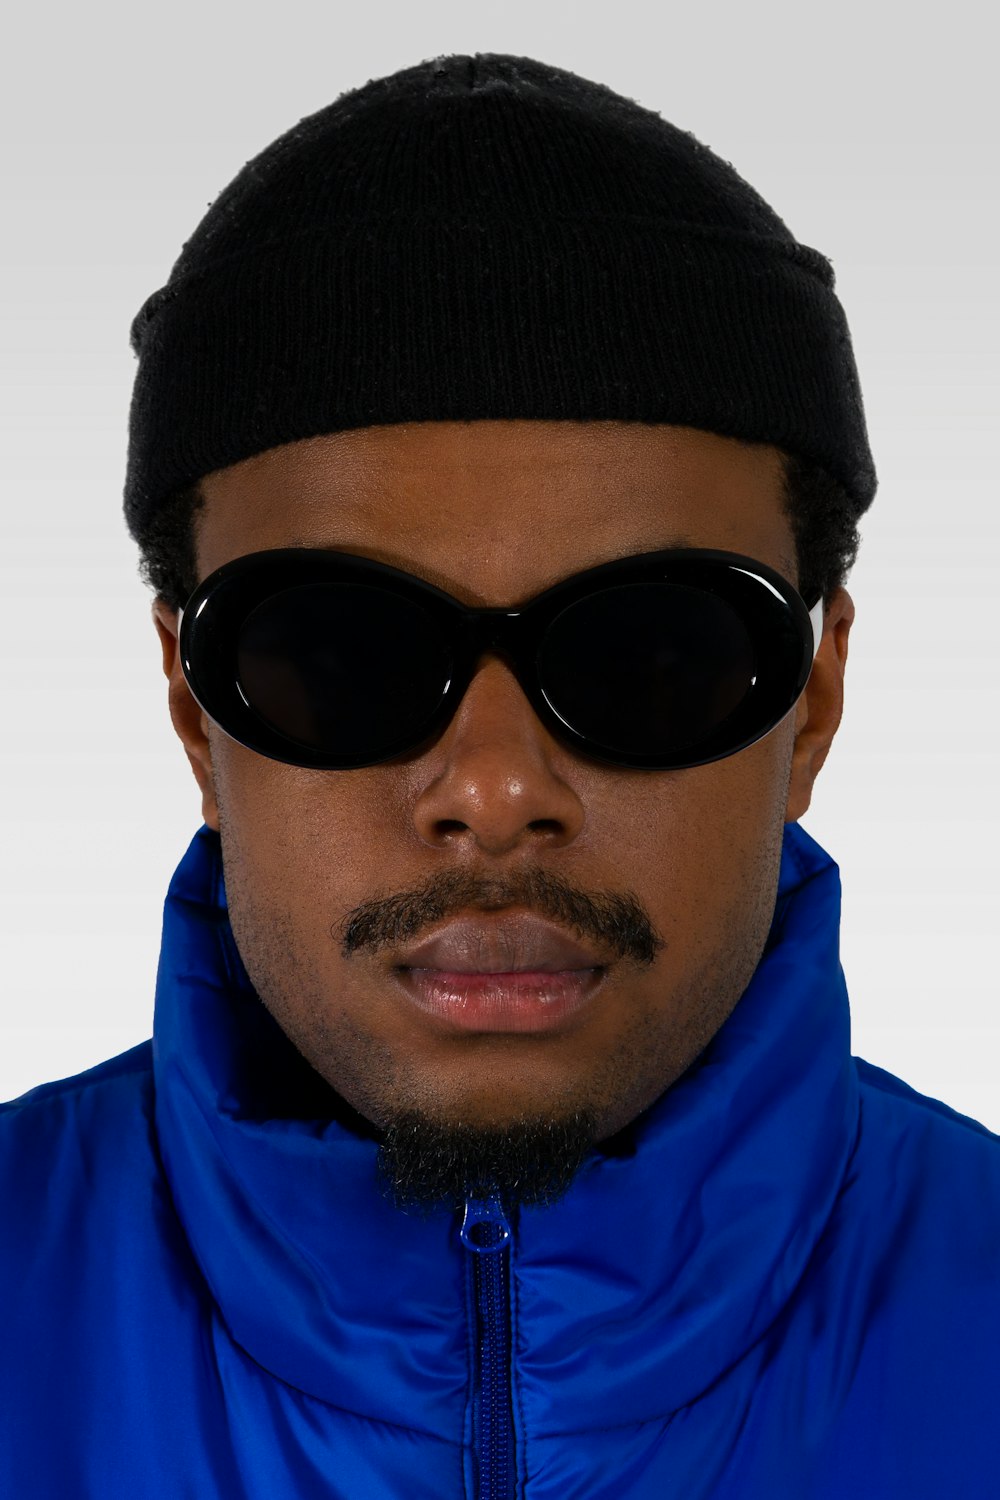 man in blue jacket wearing black knit cap and black sunglasses